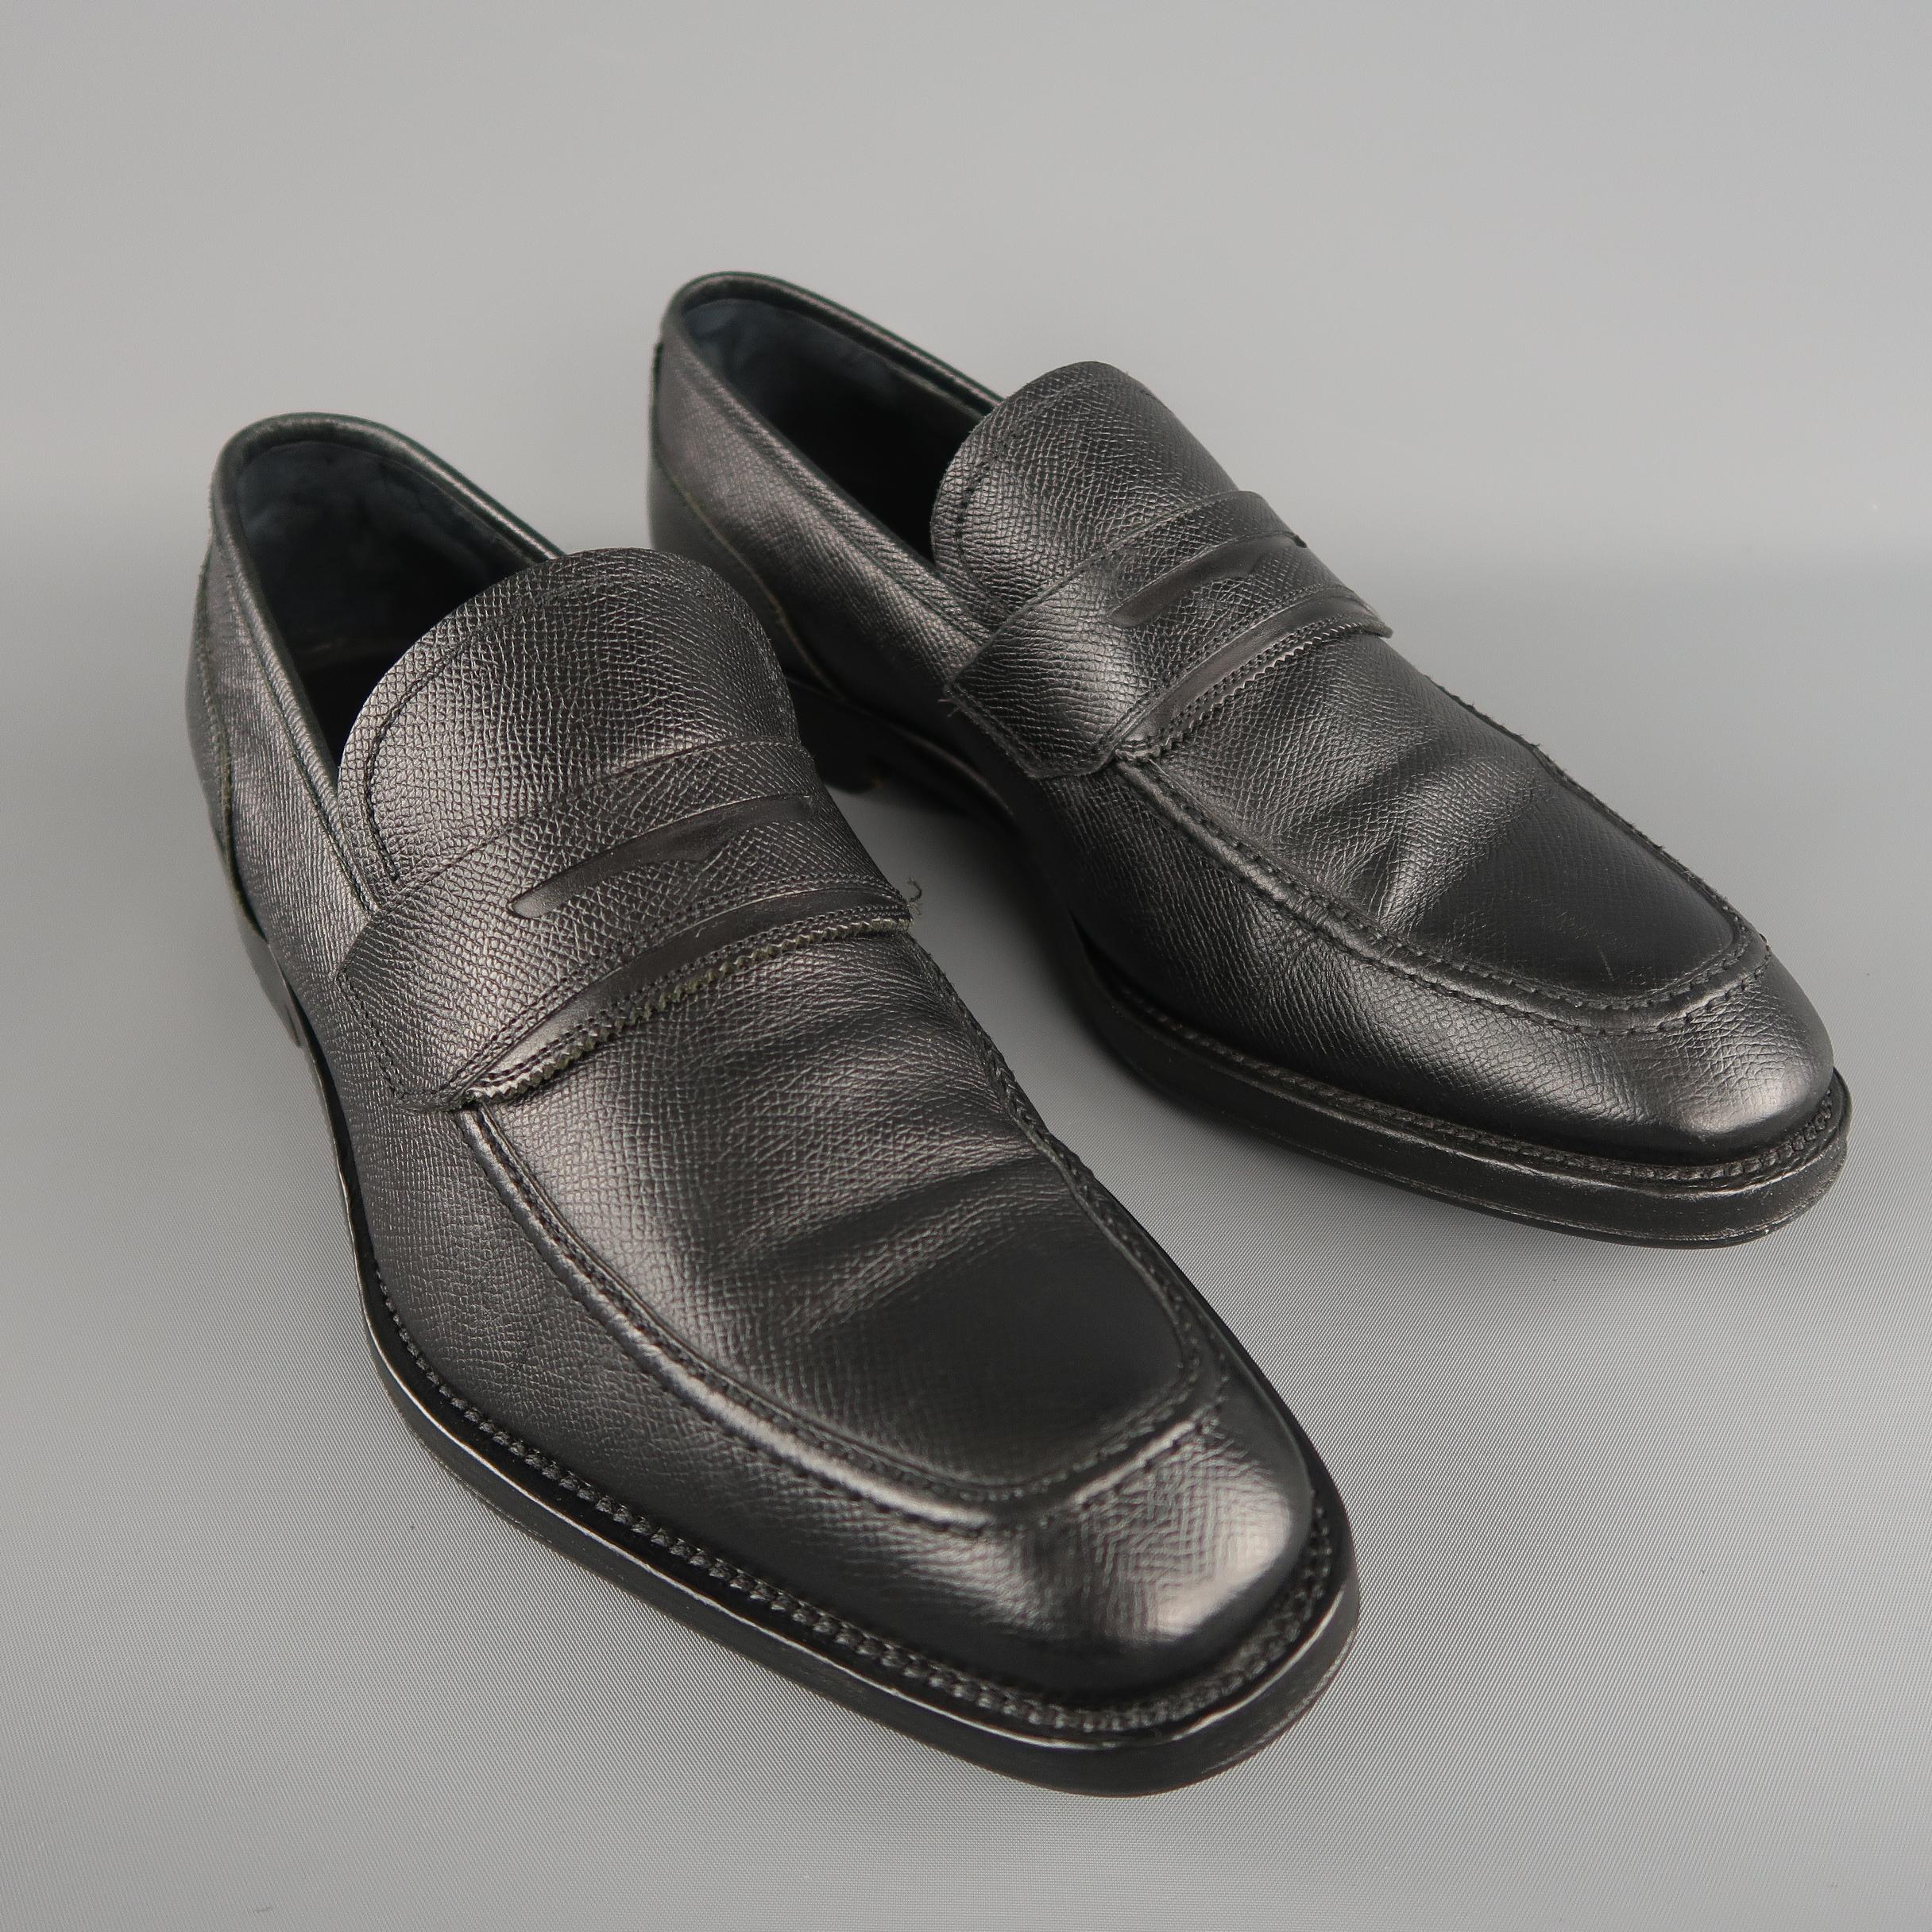 SALVATORE  FERRAGAMO slip-on loafers come in black color in grain leather material. Added non slip sole. 

Made in Italy. 
Excellent Pre-Owned Condition
Marked: 9 UK
 
Measurements:
Outsole: 12 x 2.5  in.
